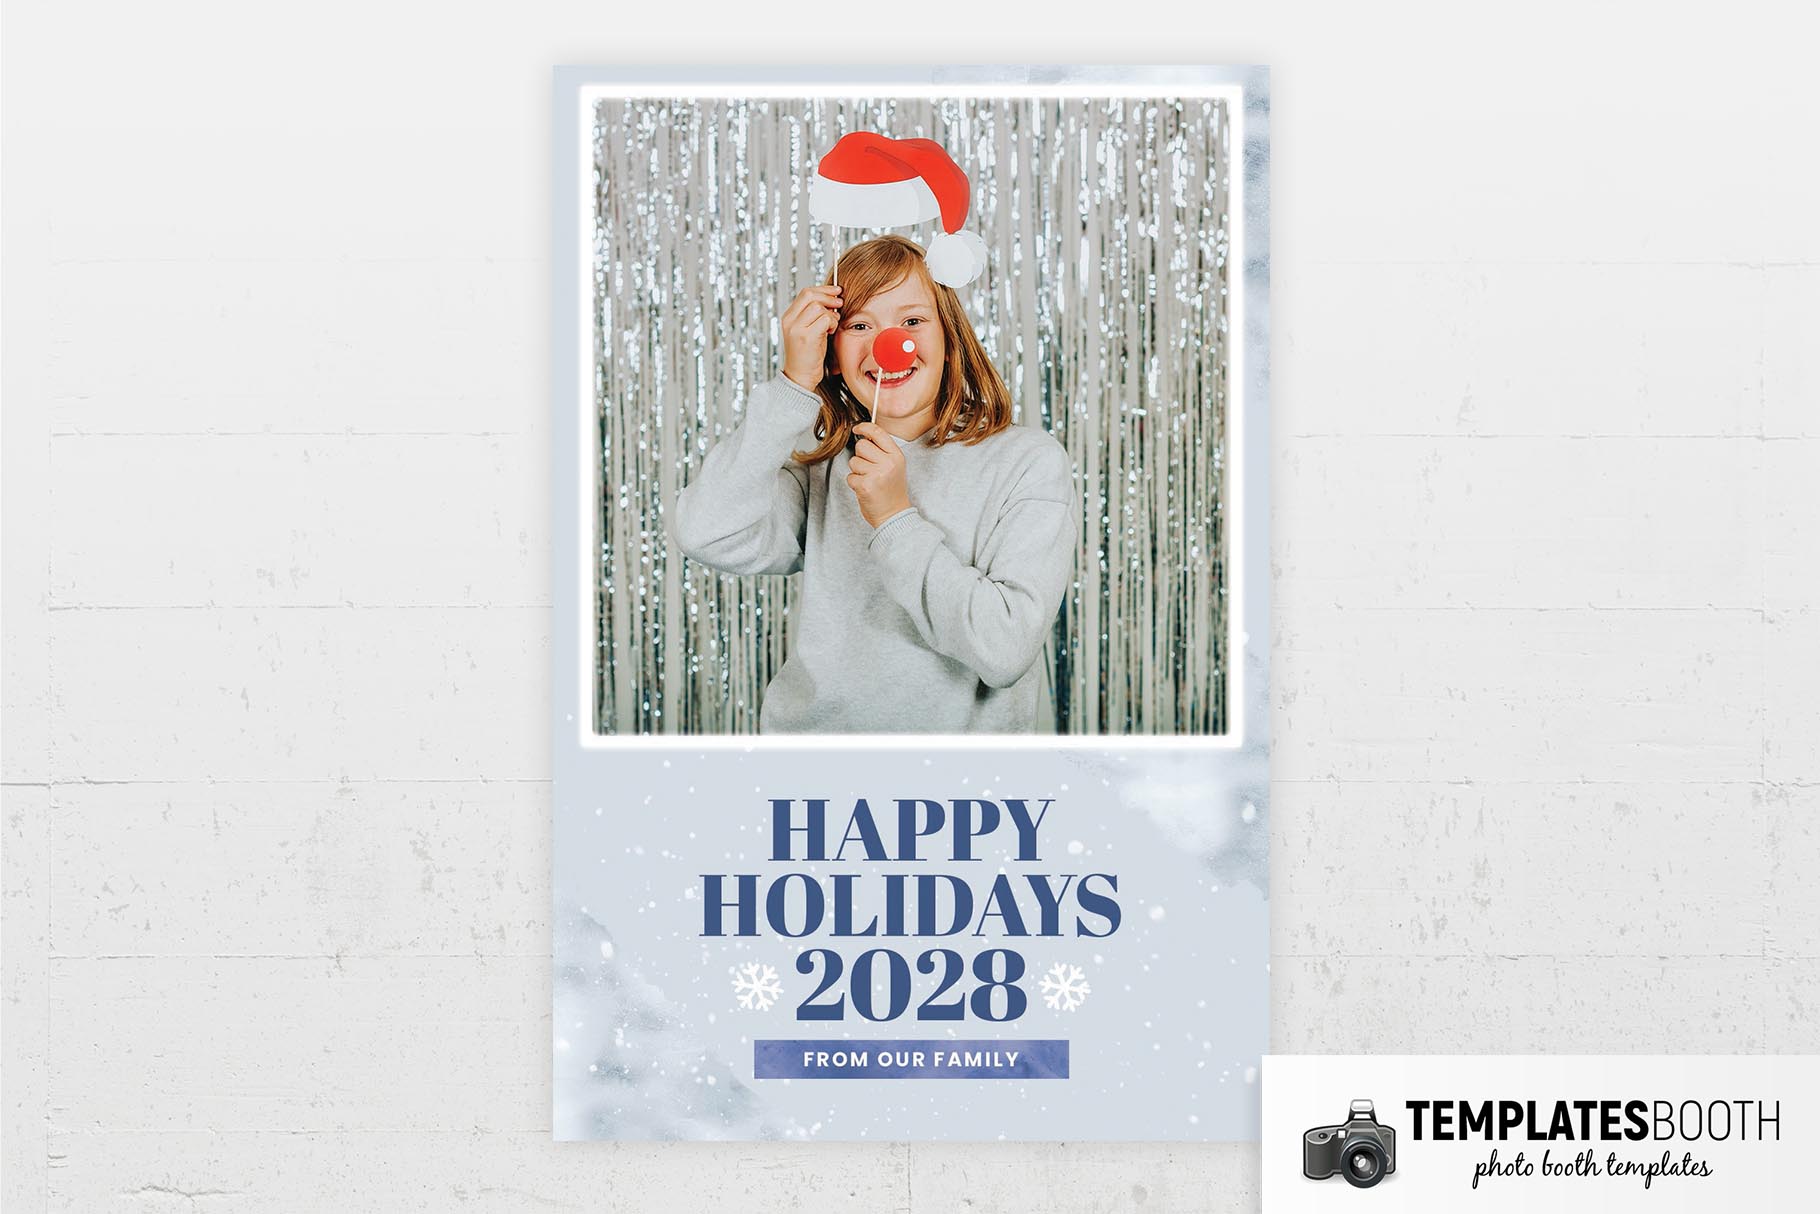 Free Winter Photo Booth Template (PSD, PNG, DSLR Booth, Darkroom Formats)